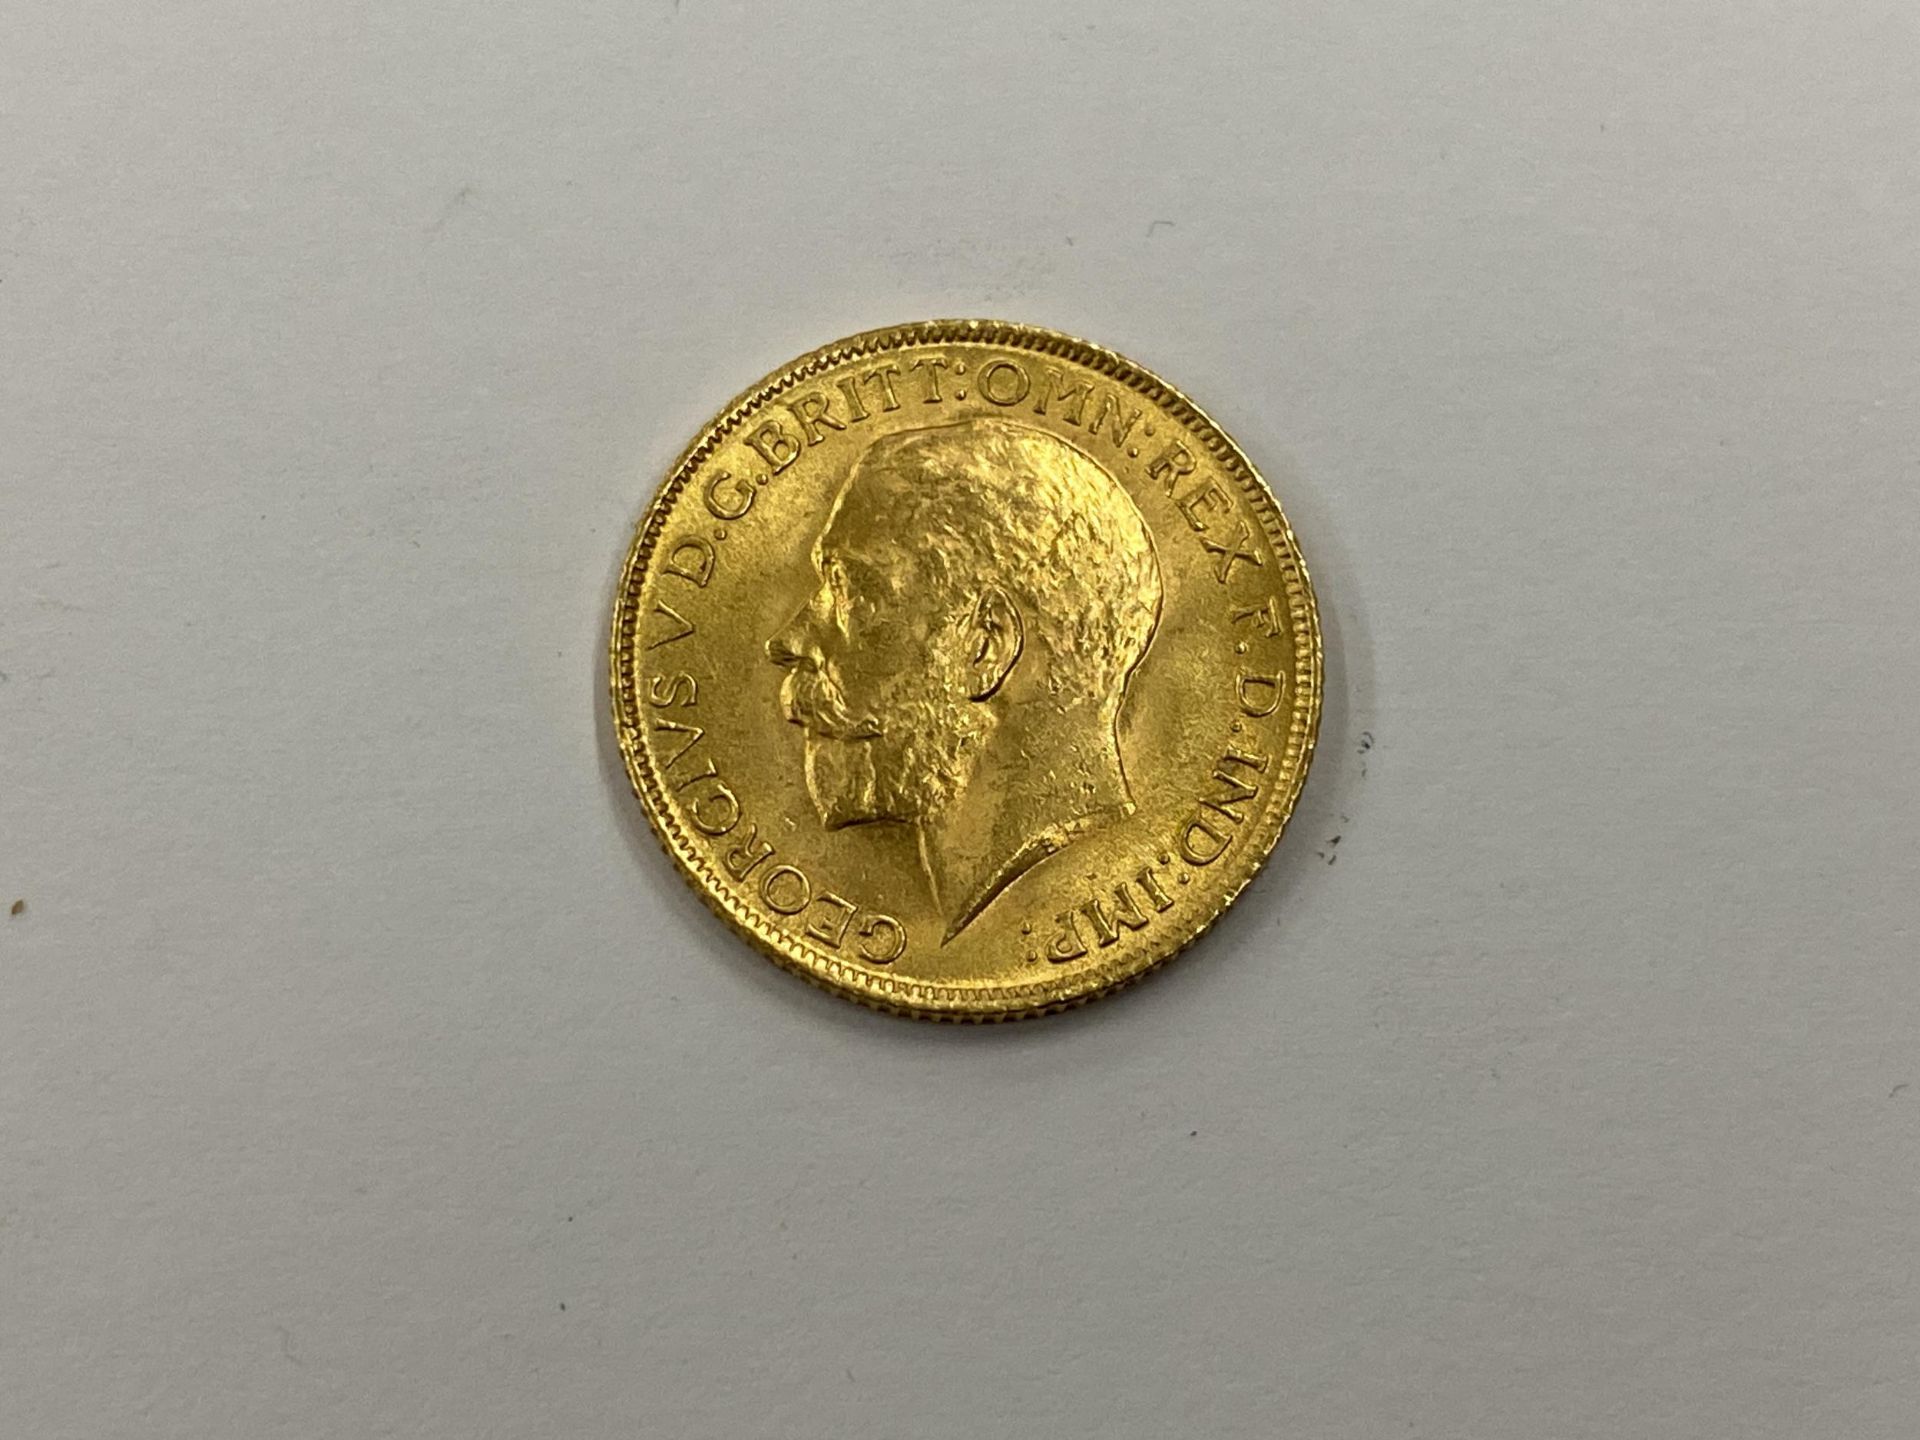 A GEORGE V 1913 GOLD FULL SOVEREIGN COIN - Image 2 of 2